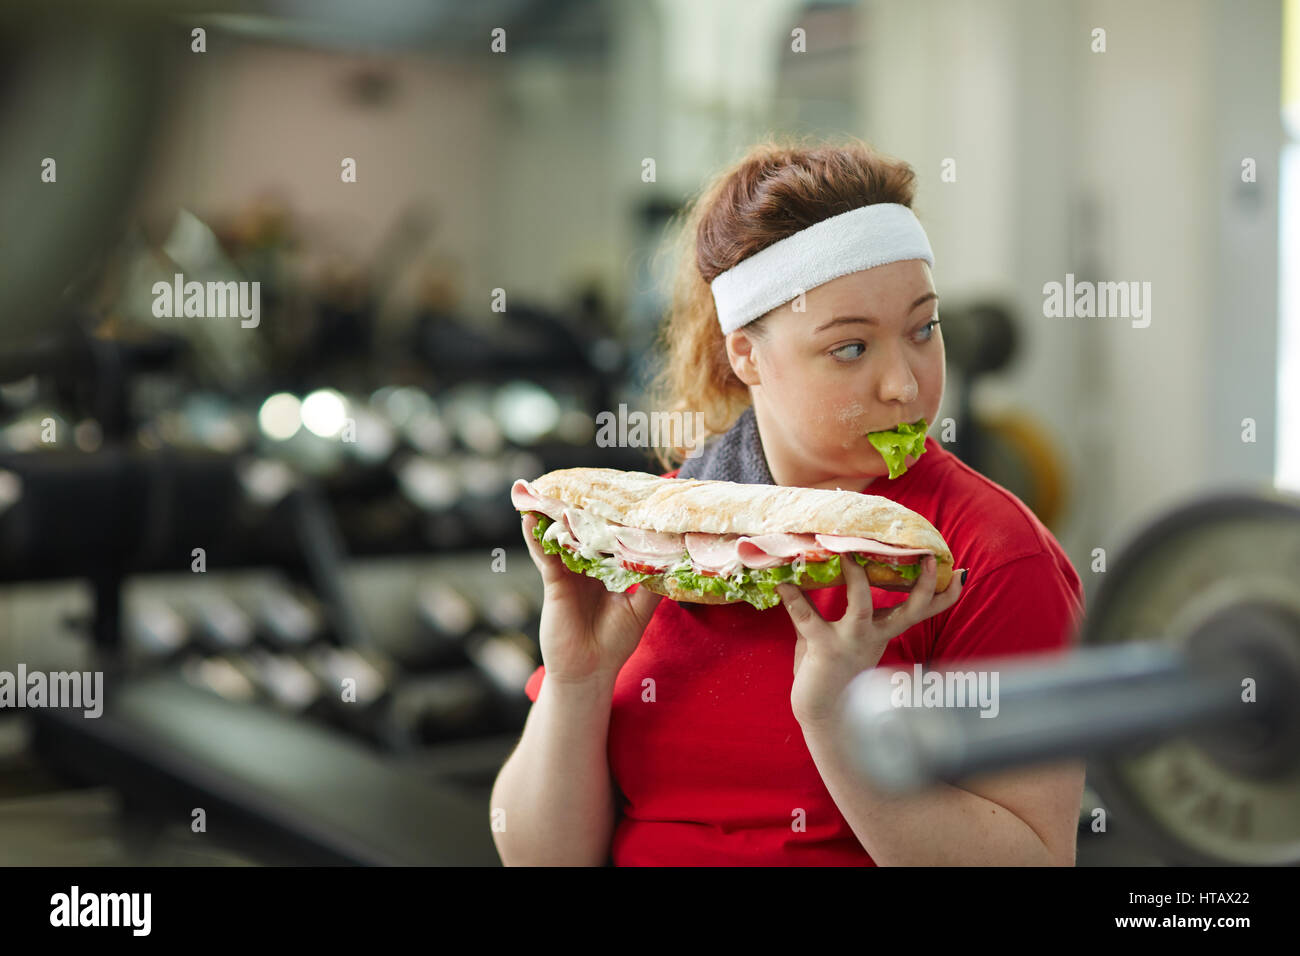 Portrait of young overweight woman eating big greasy fattening sandwich at work out in gym, concept of food obsession Stock Photo